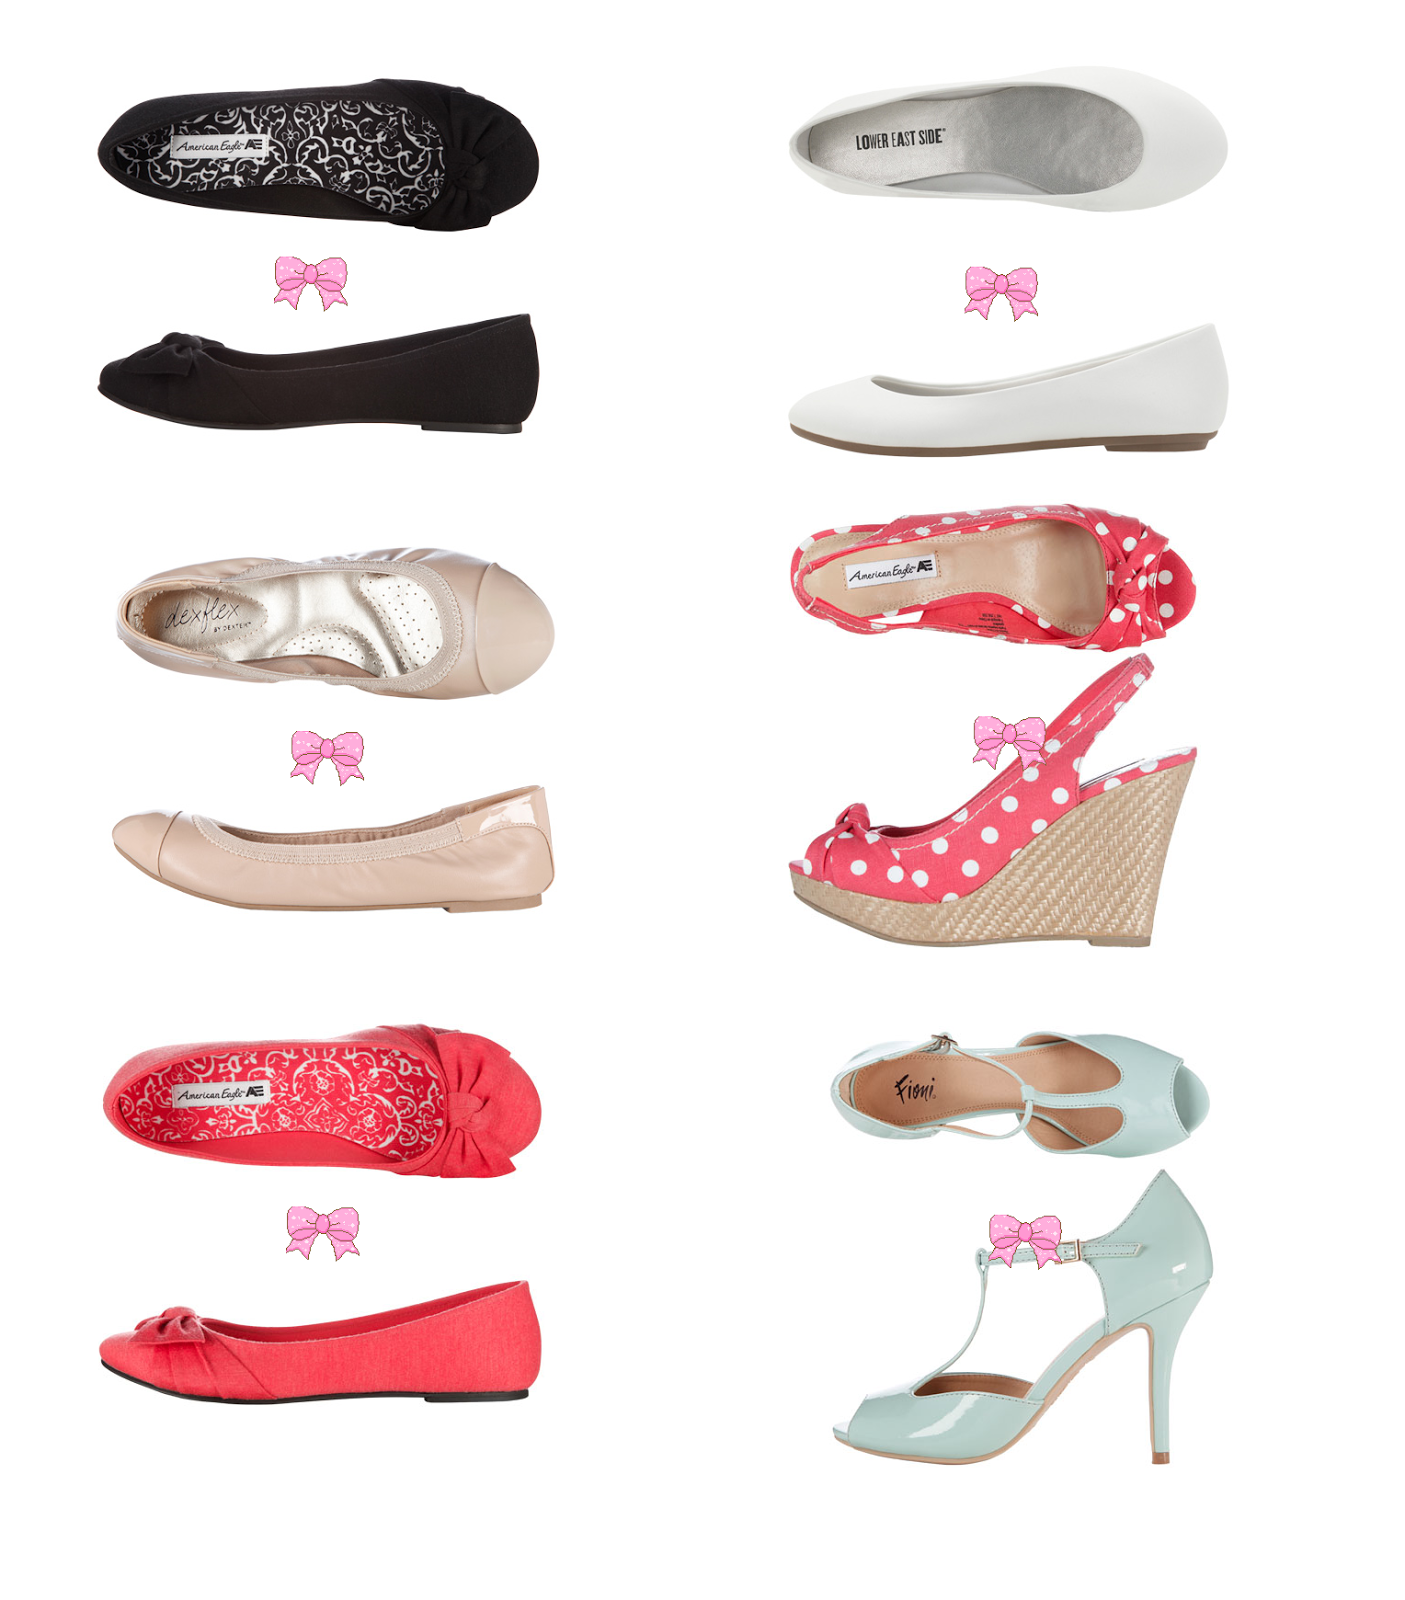 A girls guide to life : Cute shoes for cheap